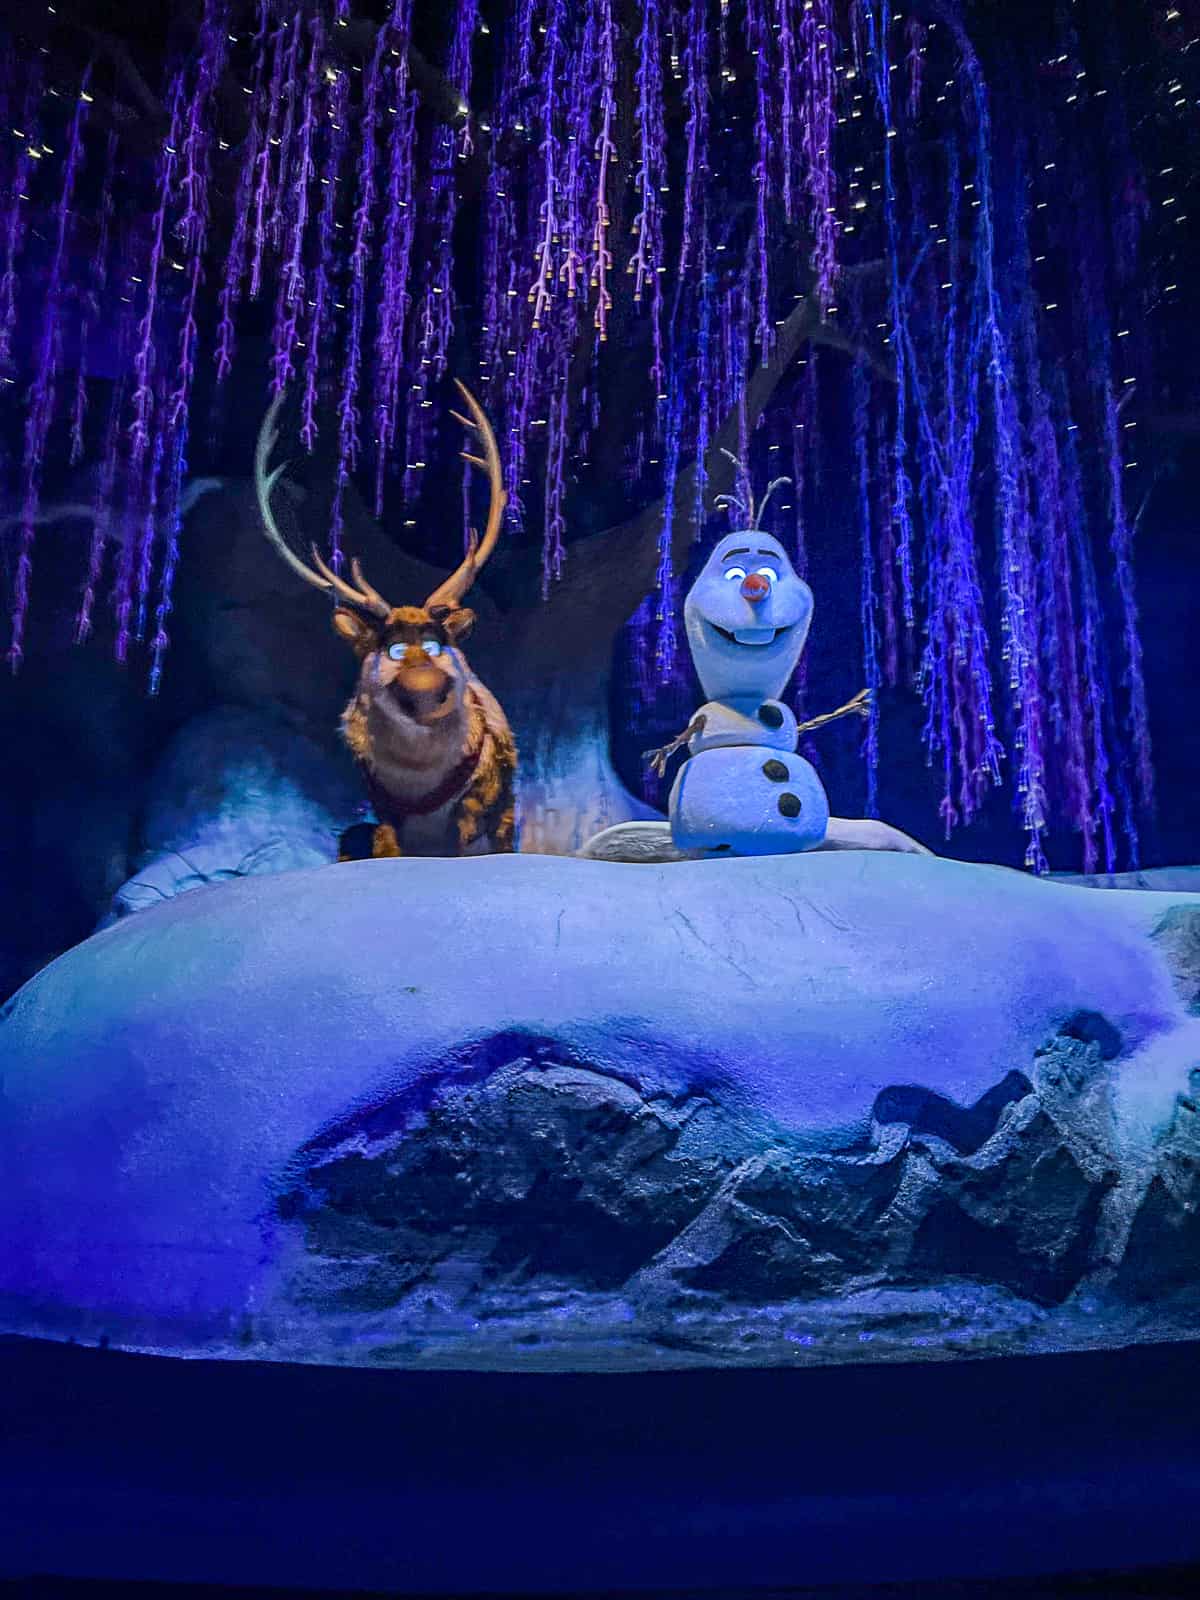 Auto anamatronics inside Frozen Ride with Olaf in Norway Pavilion Epcot